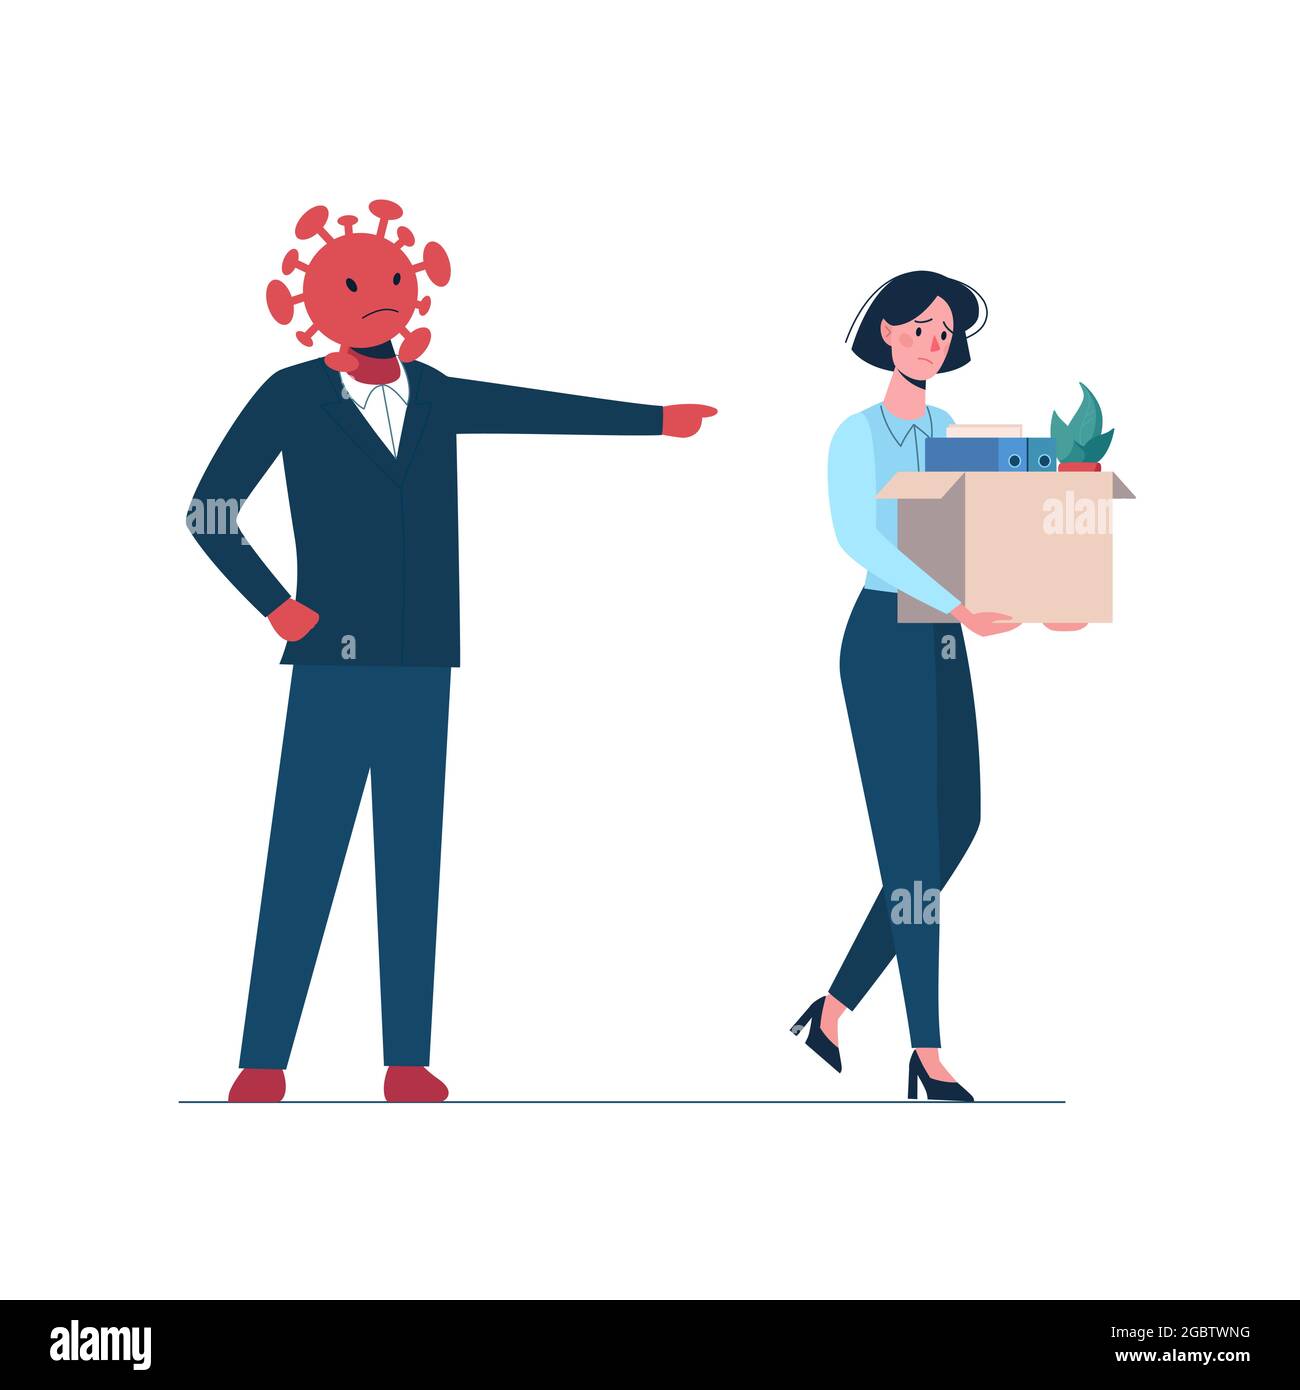 Angry coronavirus leaves a person without work. Fired woman leaves the office with a box in her hands. Job loss due to the Covid-19 virus, economic downturn. Vector flat Dismissed worker, unemployment. Stock Vector